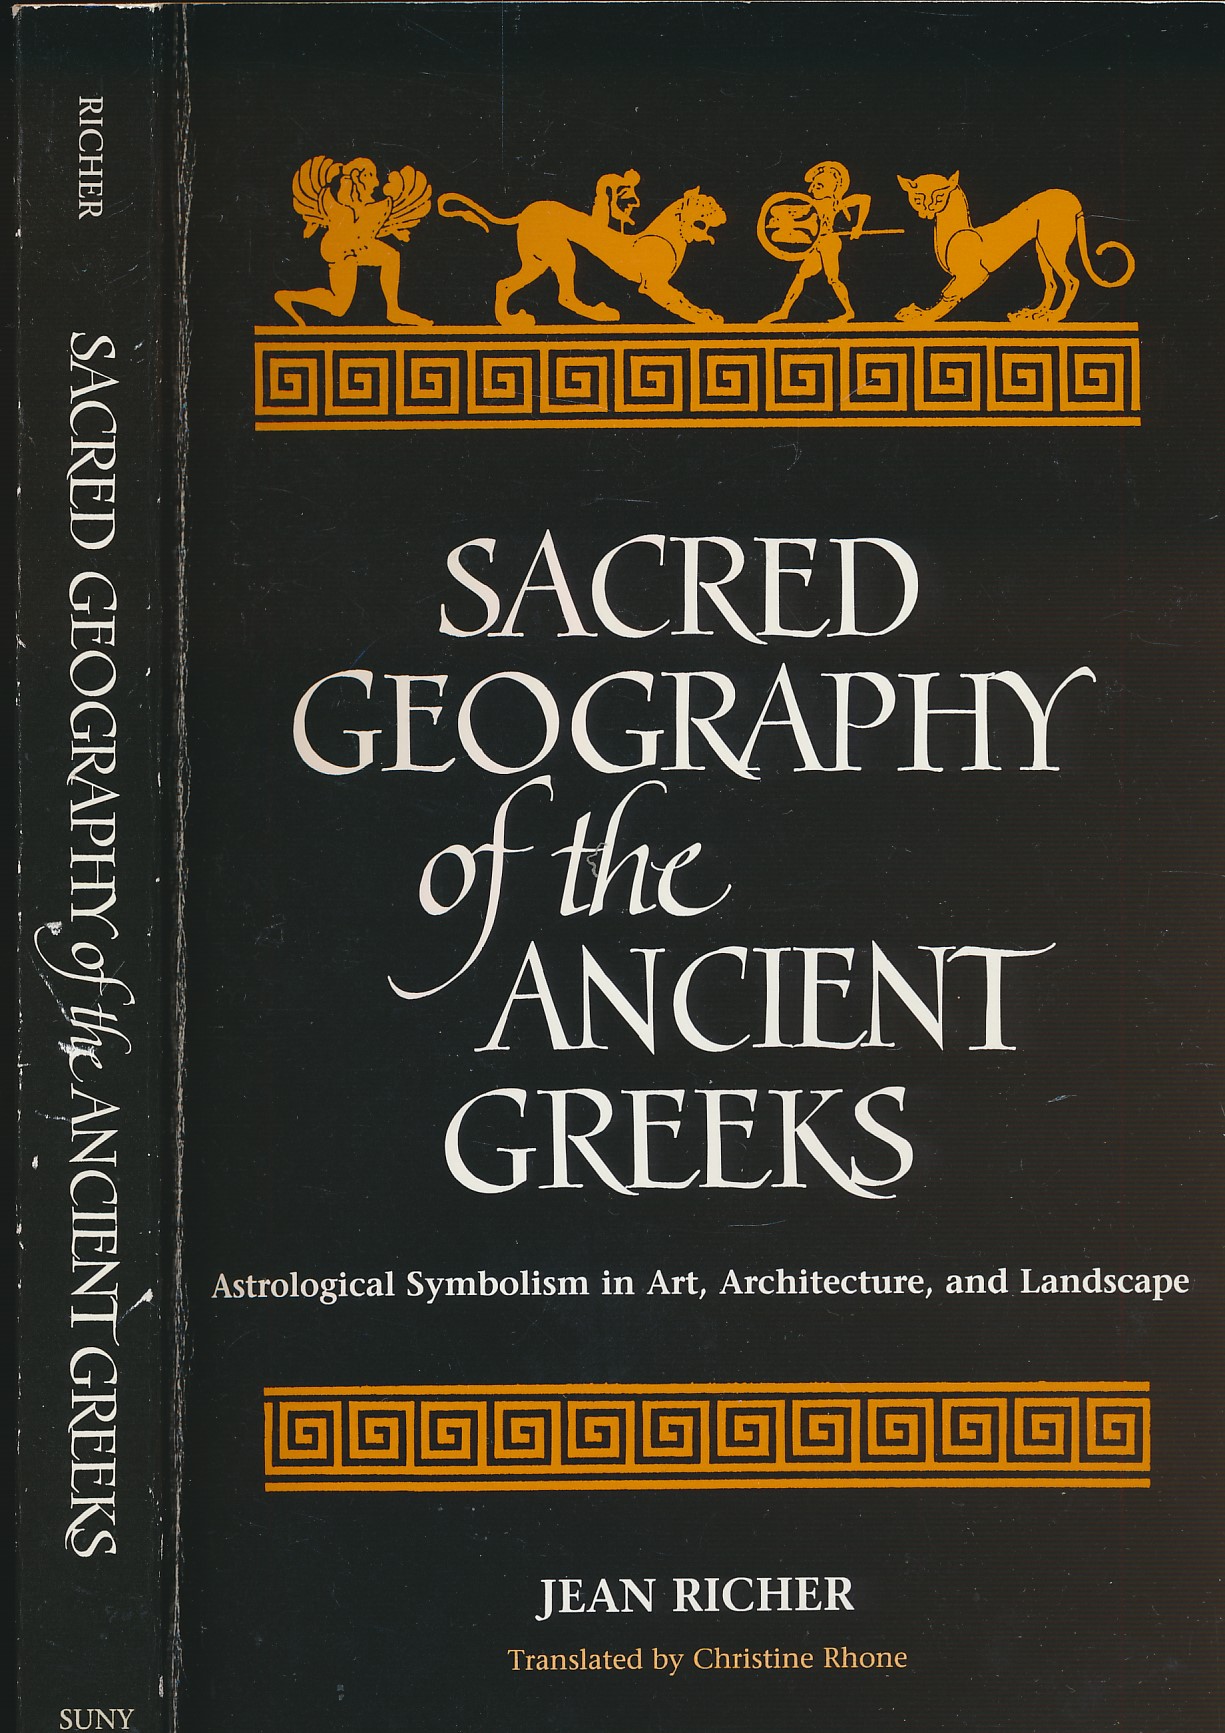 Sacred Geography of the Ancient Greeks. Astrological Symbolism in Art, Architecture and Landscape